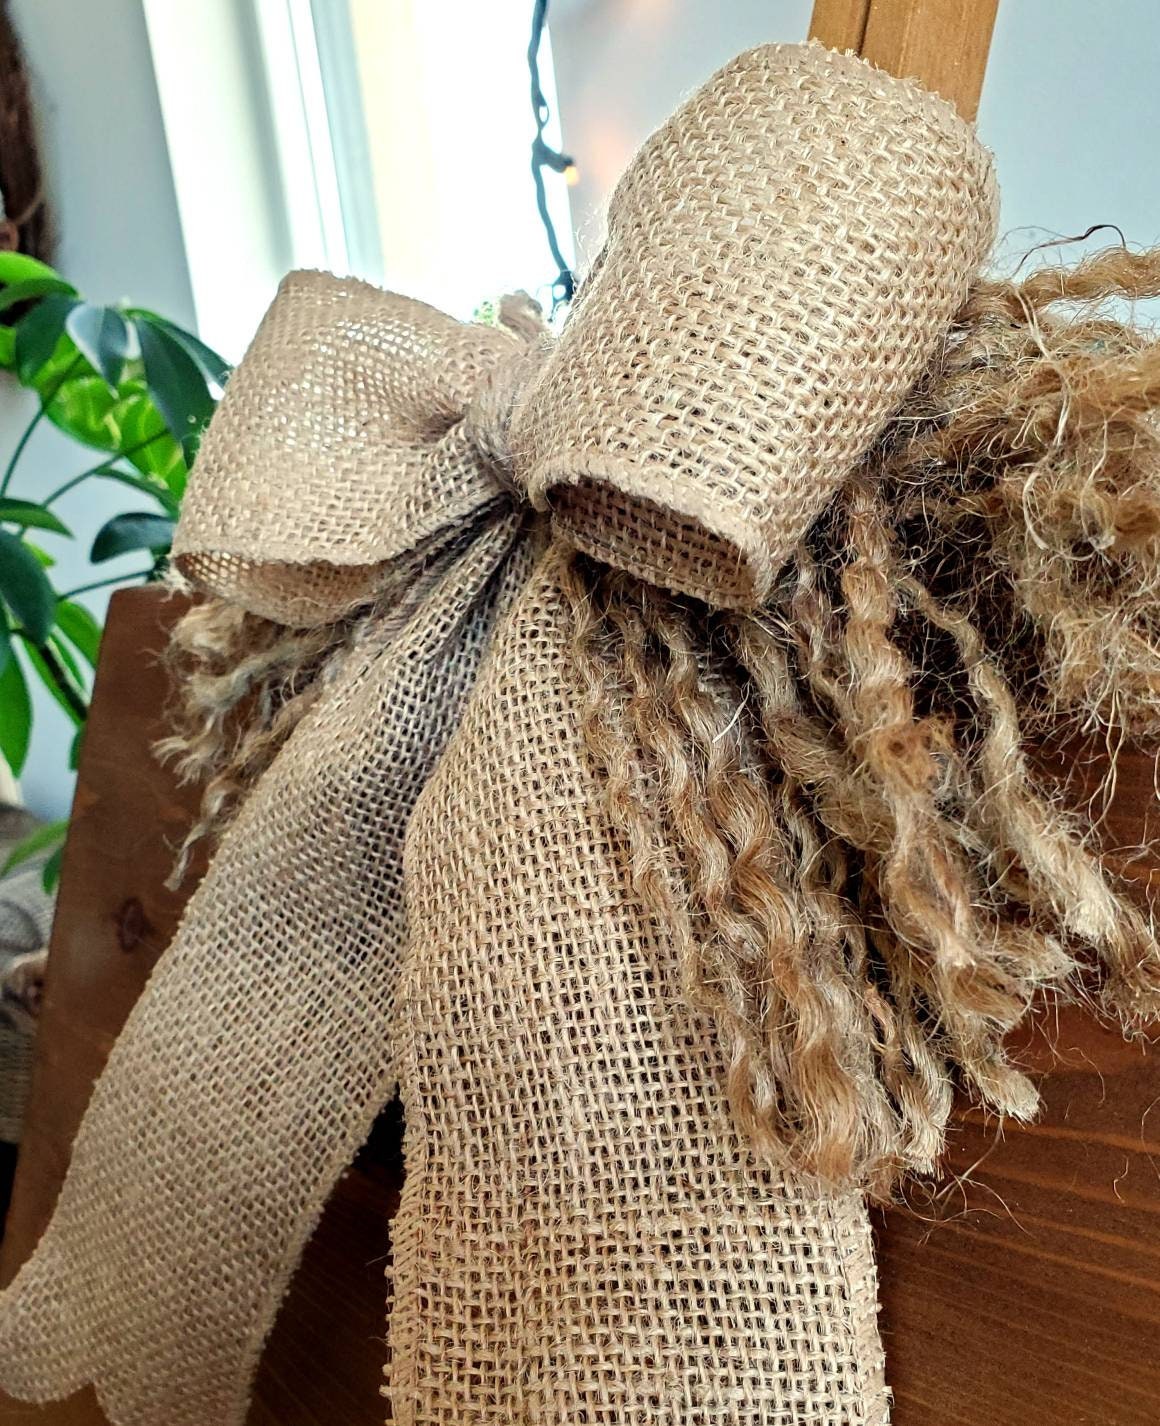 Multi-Pack of Burlap and Fringe Bows - Perfect for Decorating Your Home or Event!